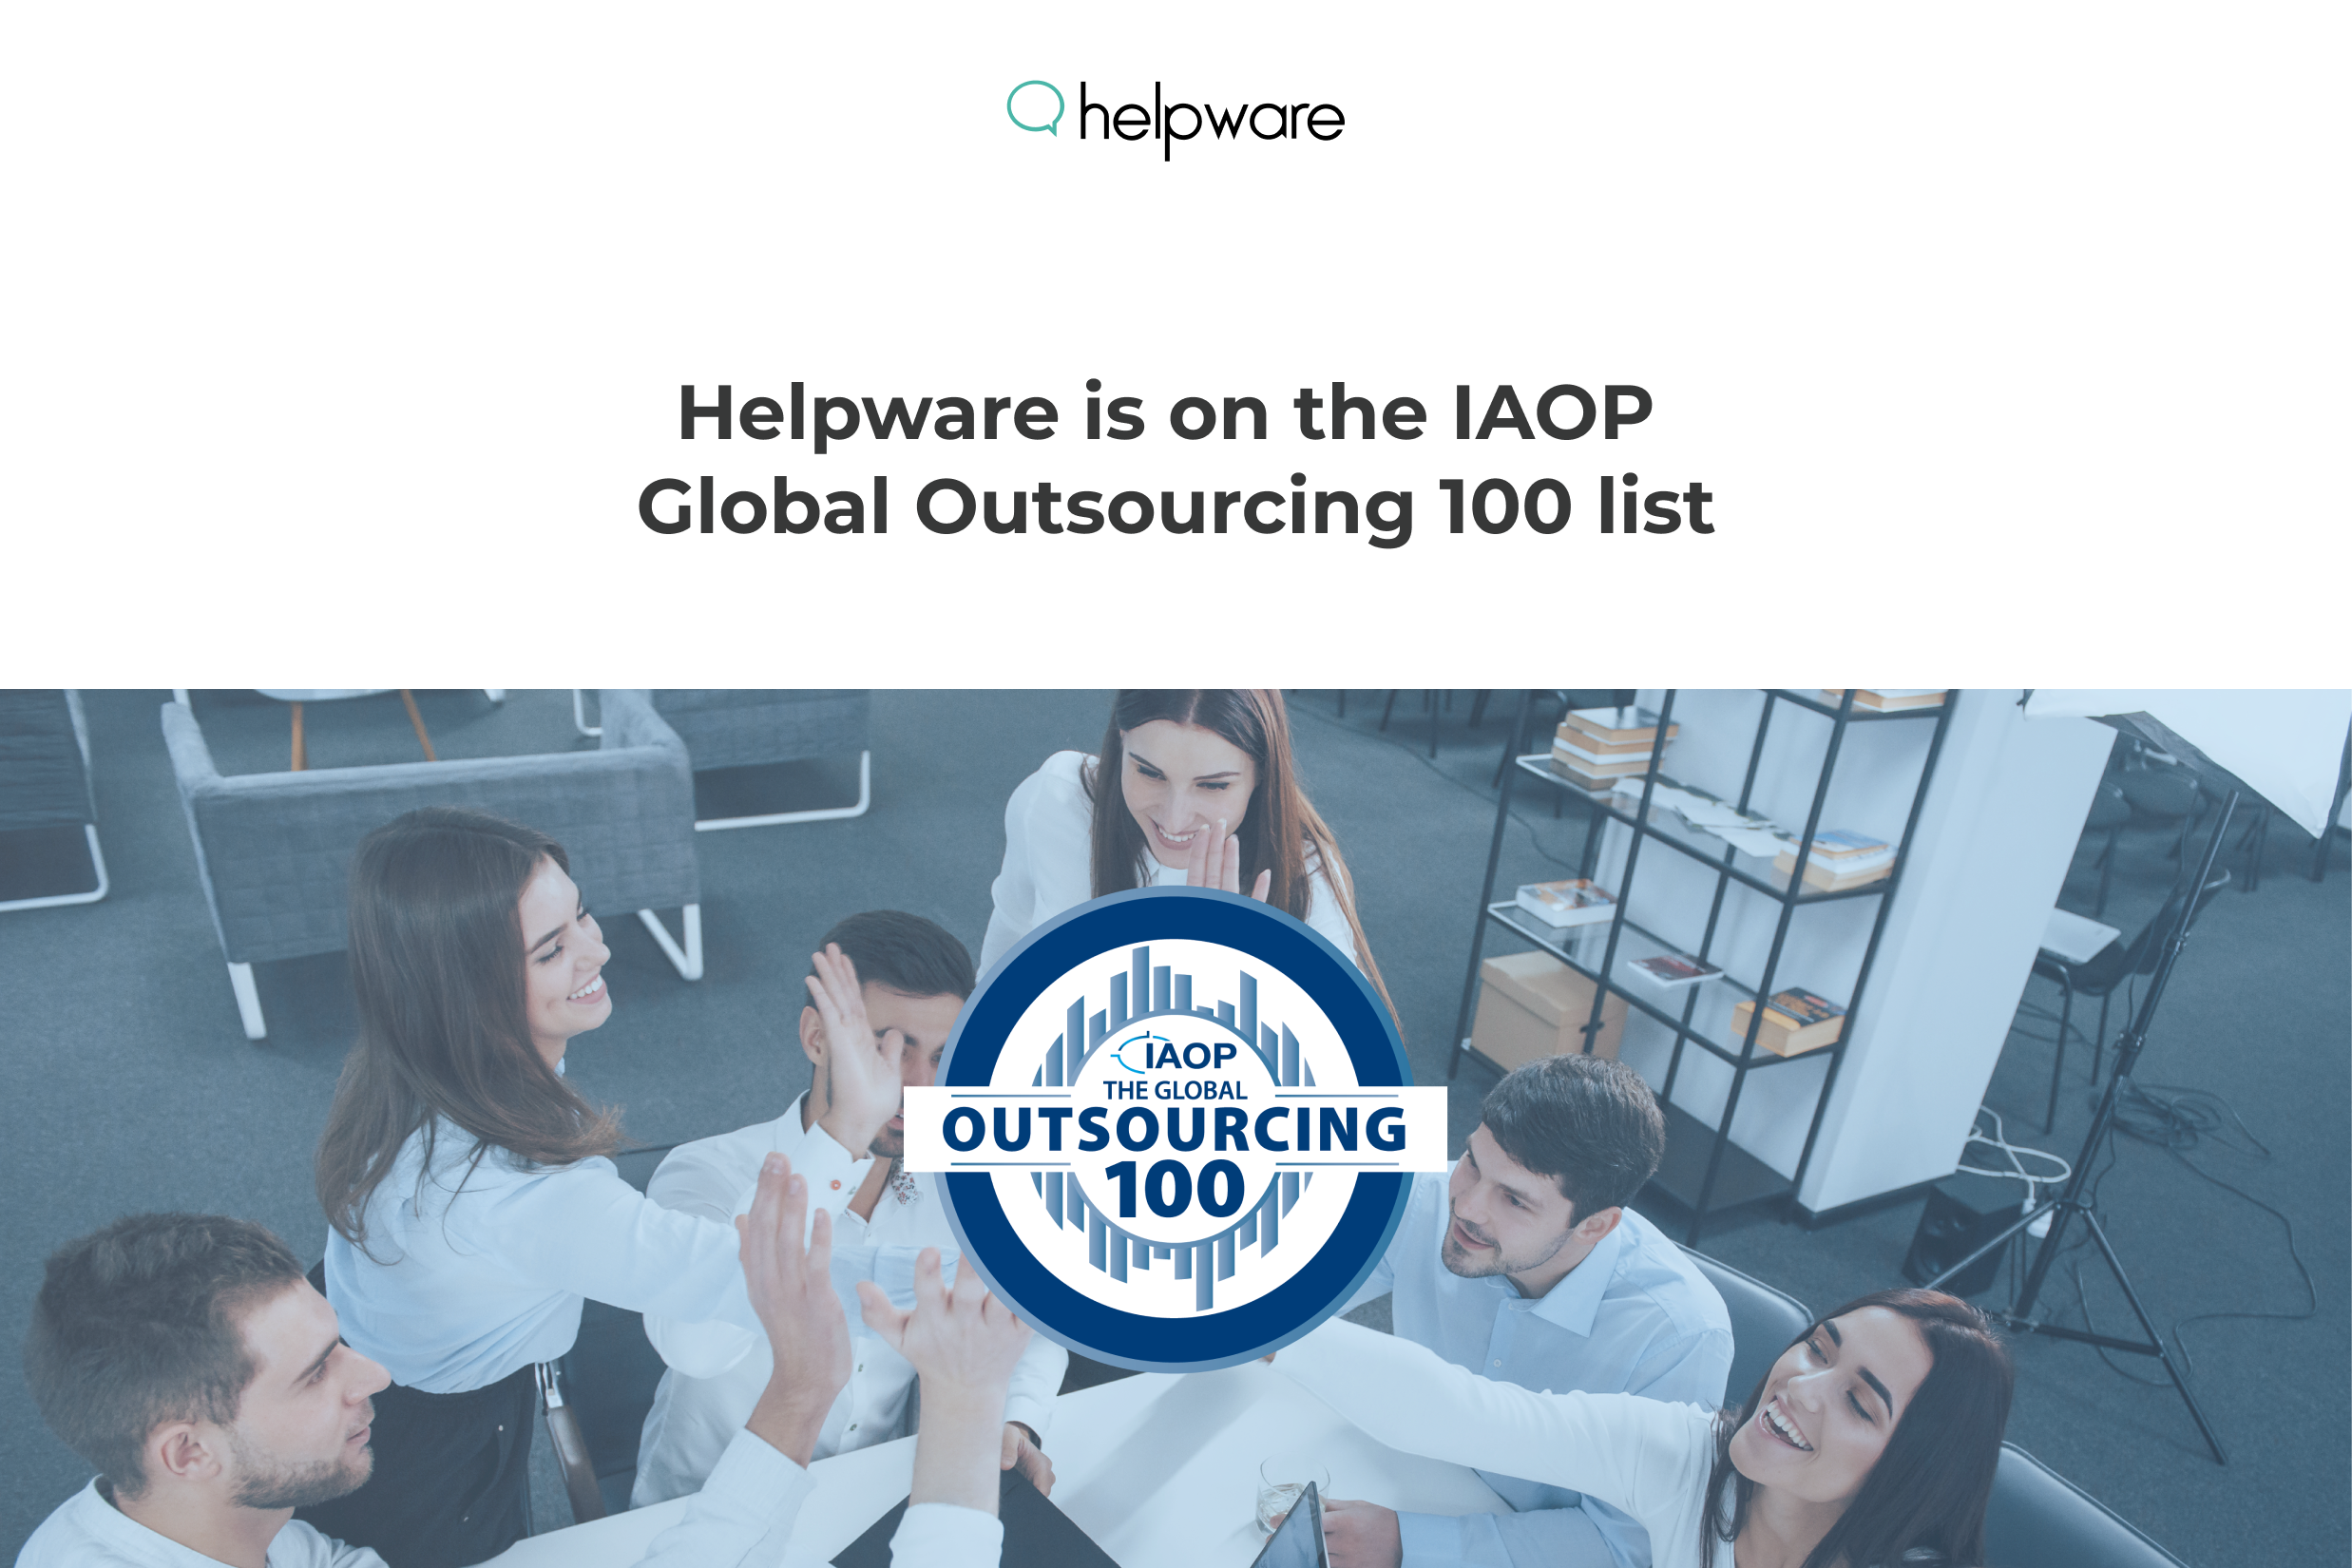 Helpware Secures a Spot on the IAOP Global Outsourcing 100 List